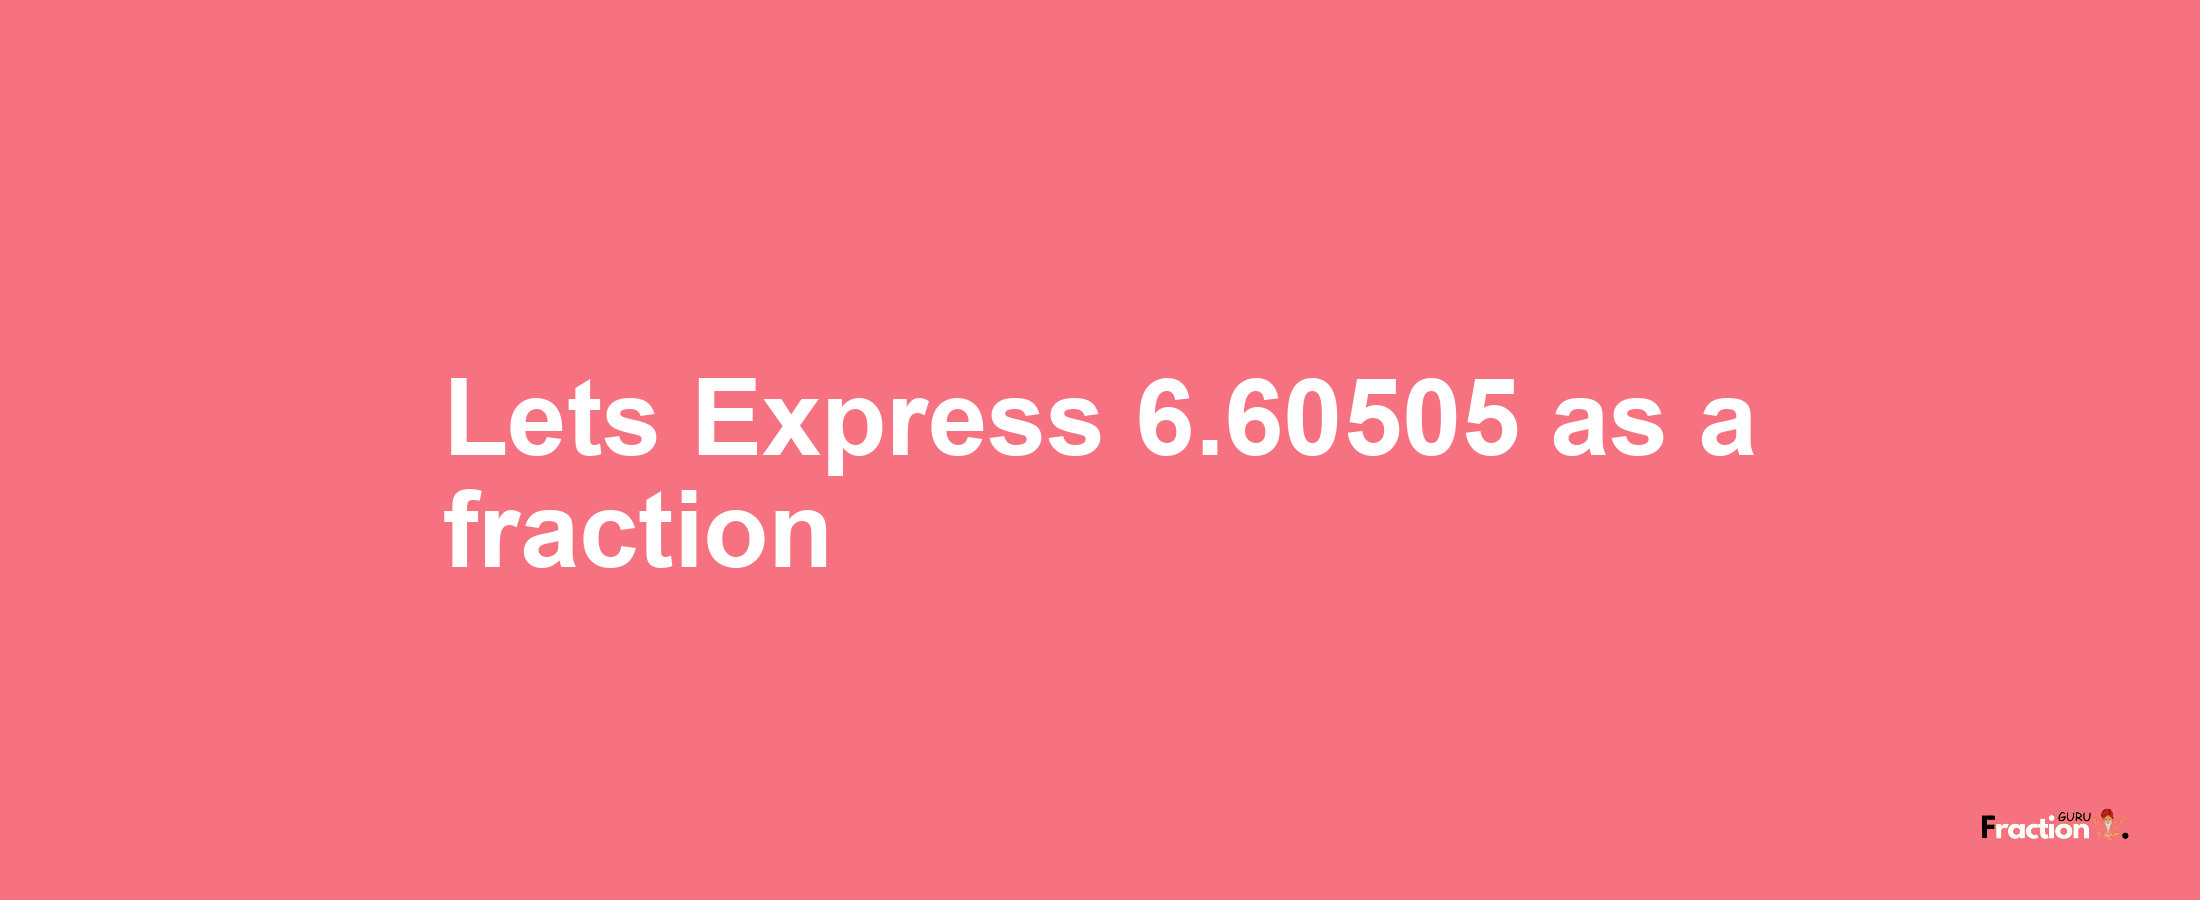 Lets Express 6.60505 as afraction